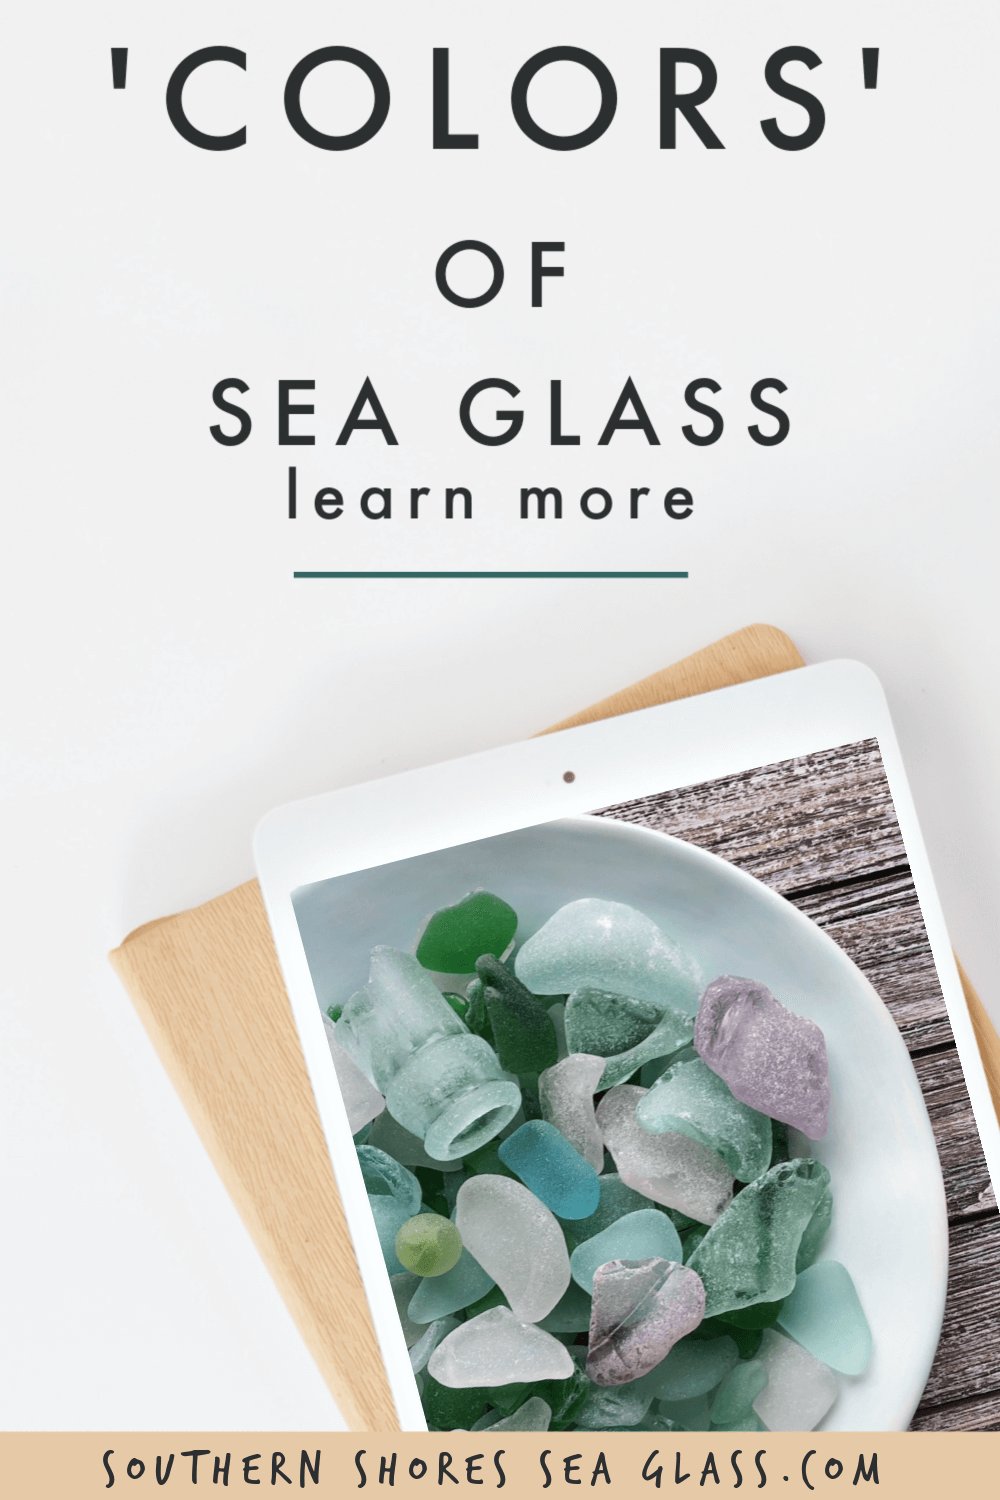 Sea Glass Colors range from common occurring colors through to rare and unique and not commonly found treasures washed onto the shoreline of some select beaches